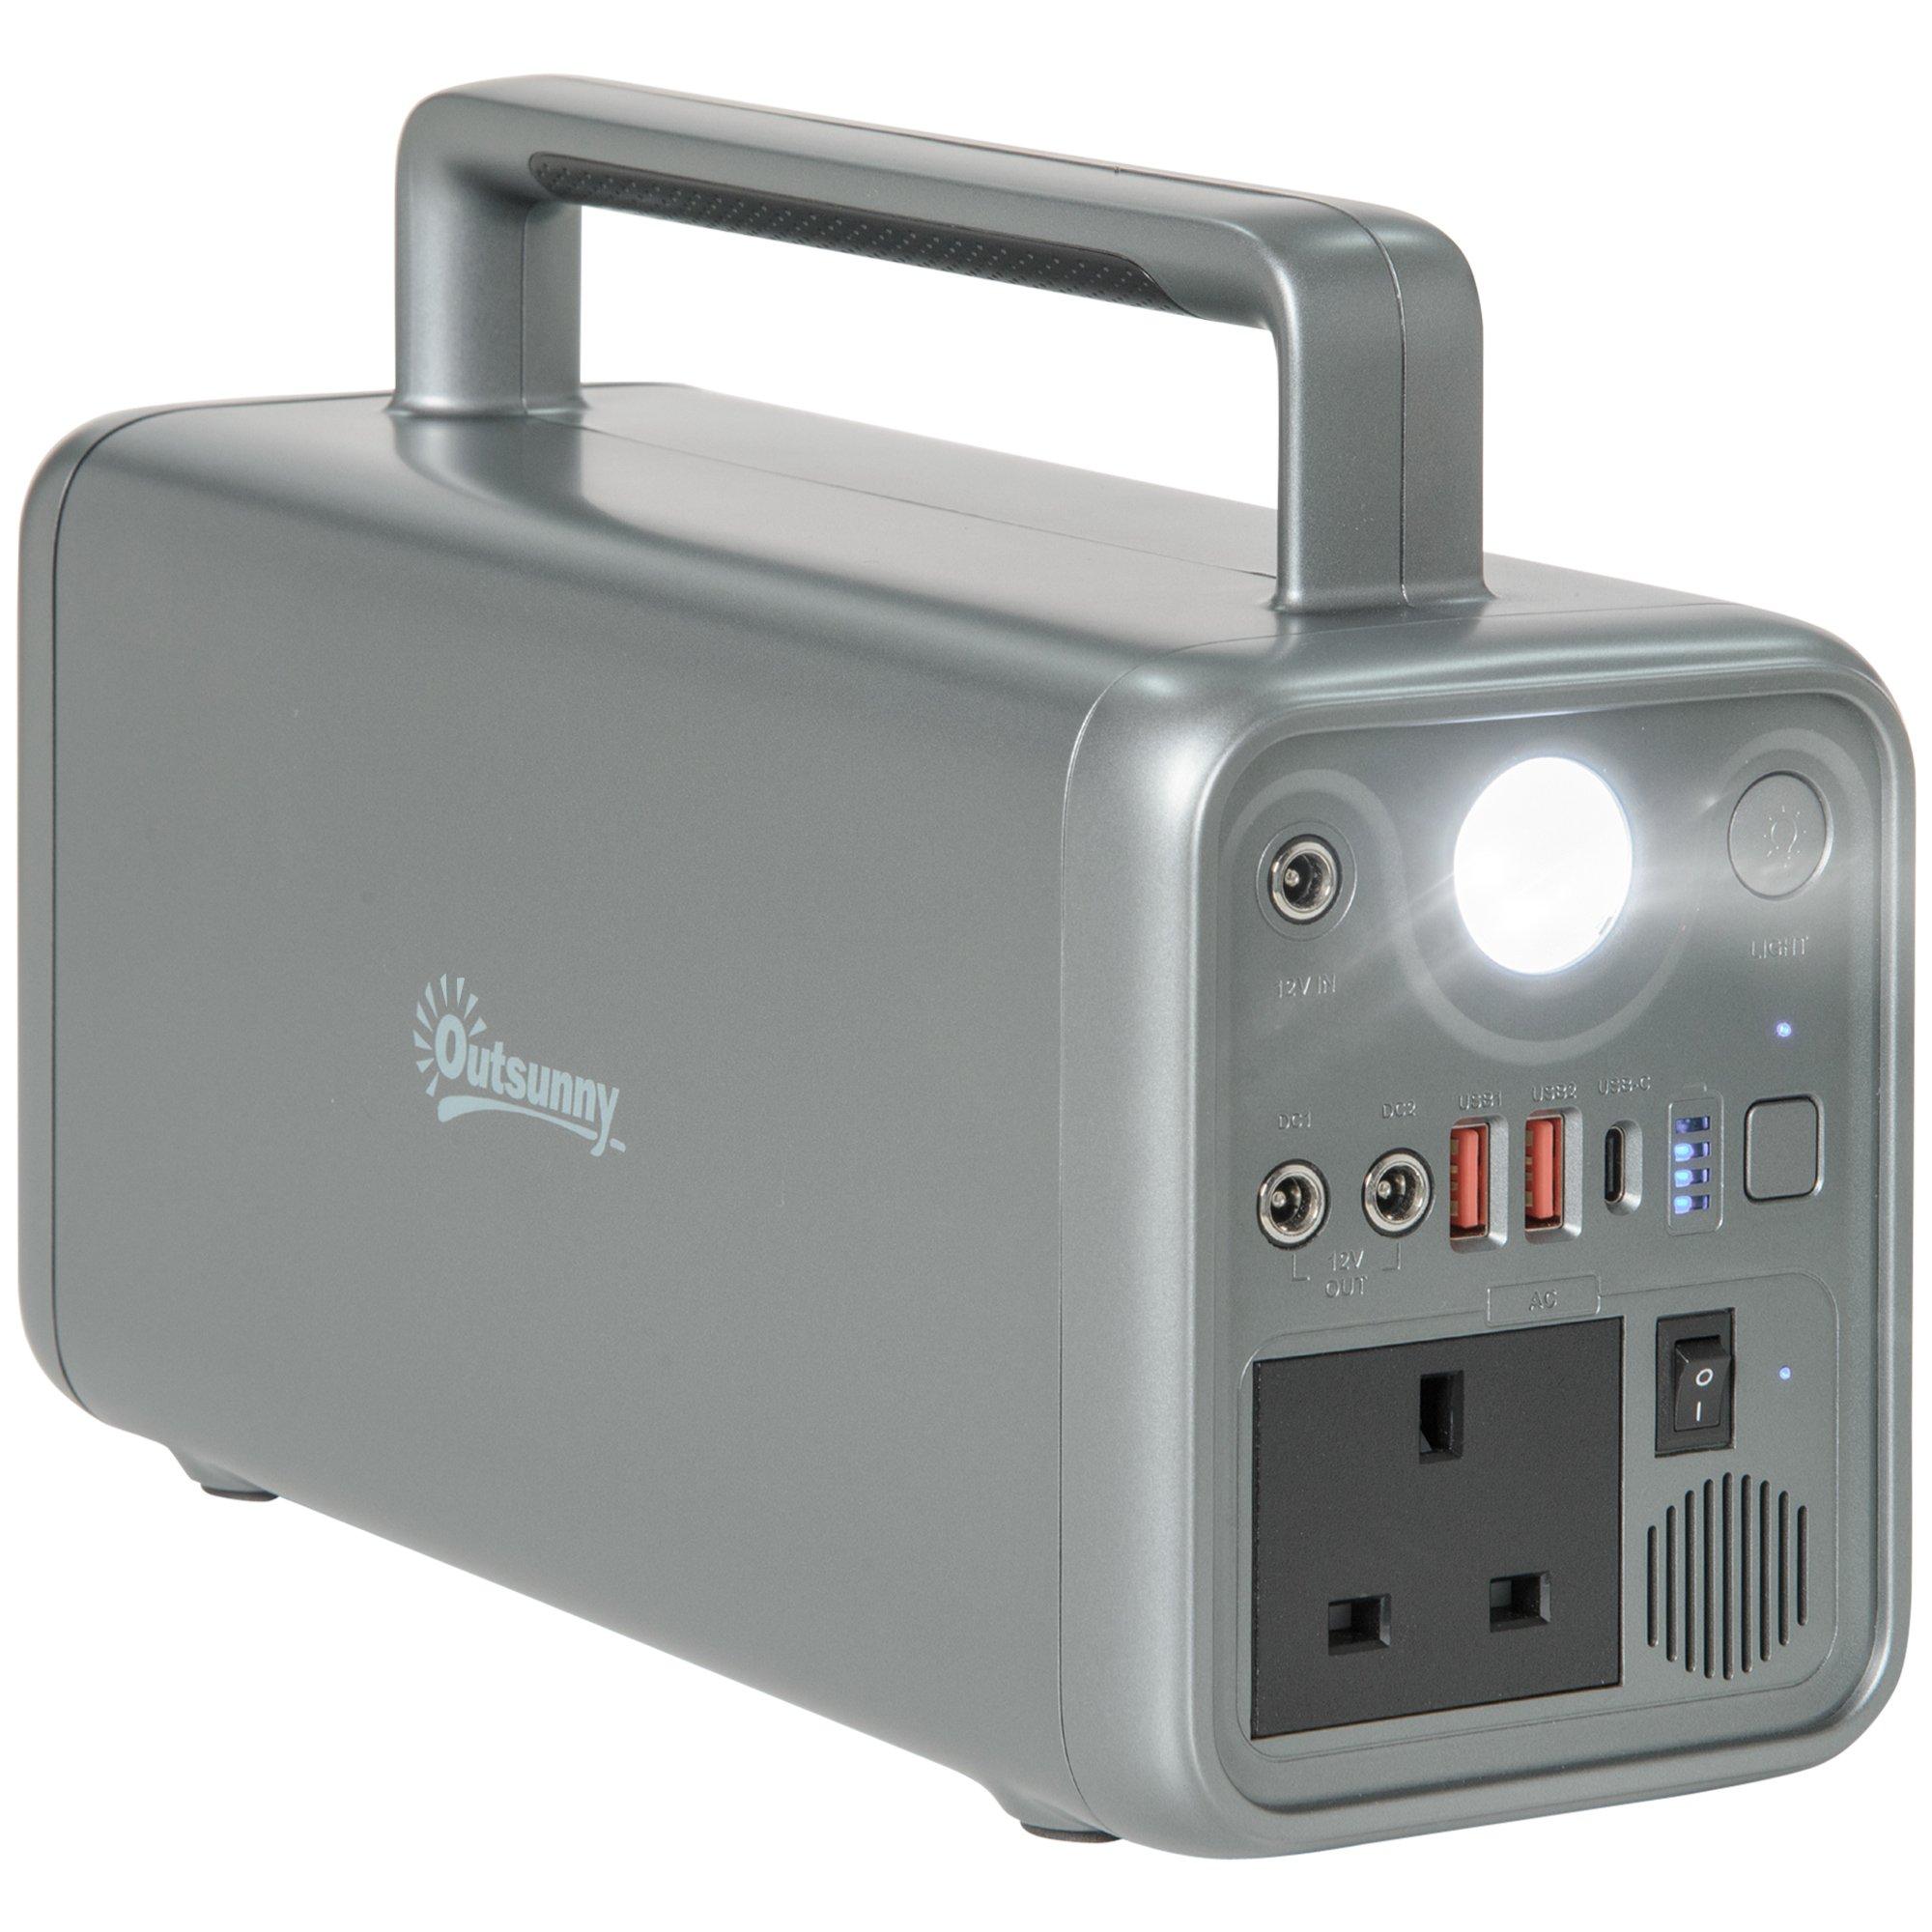 Photos - Generator Outsunny 230.4Wh Portable Power Station with AC Outlets USB/PD/CAR Ports 